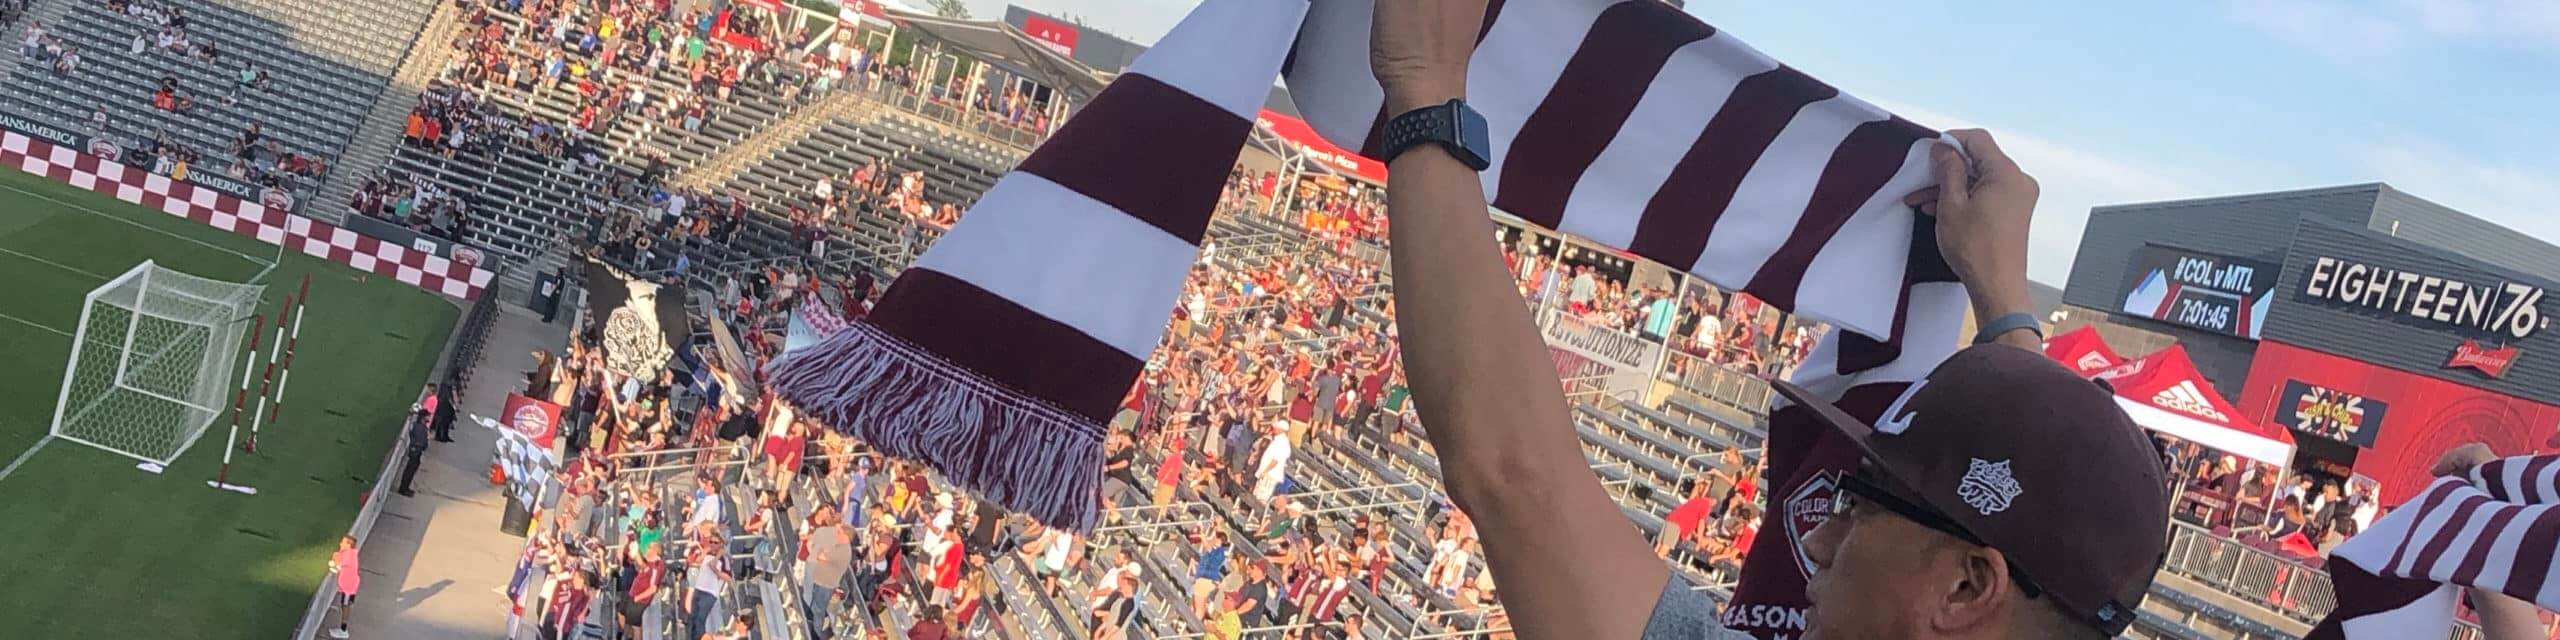 fan holding scarf up at game